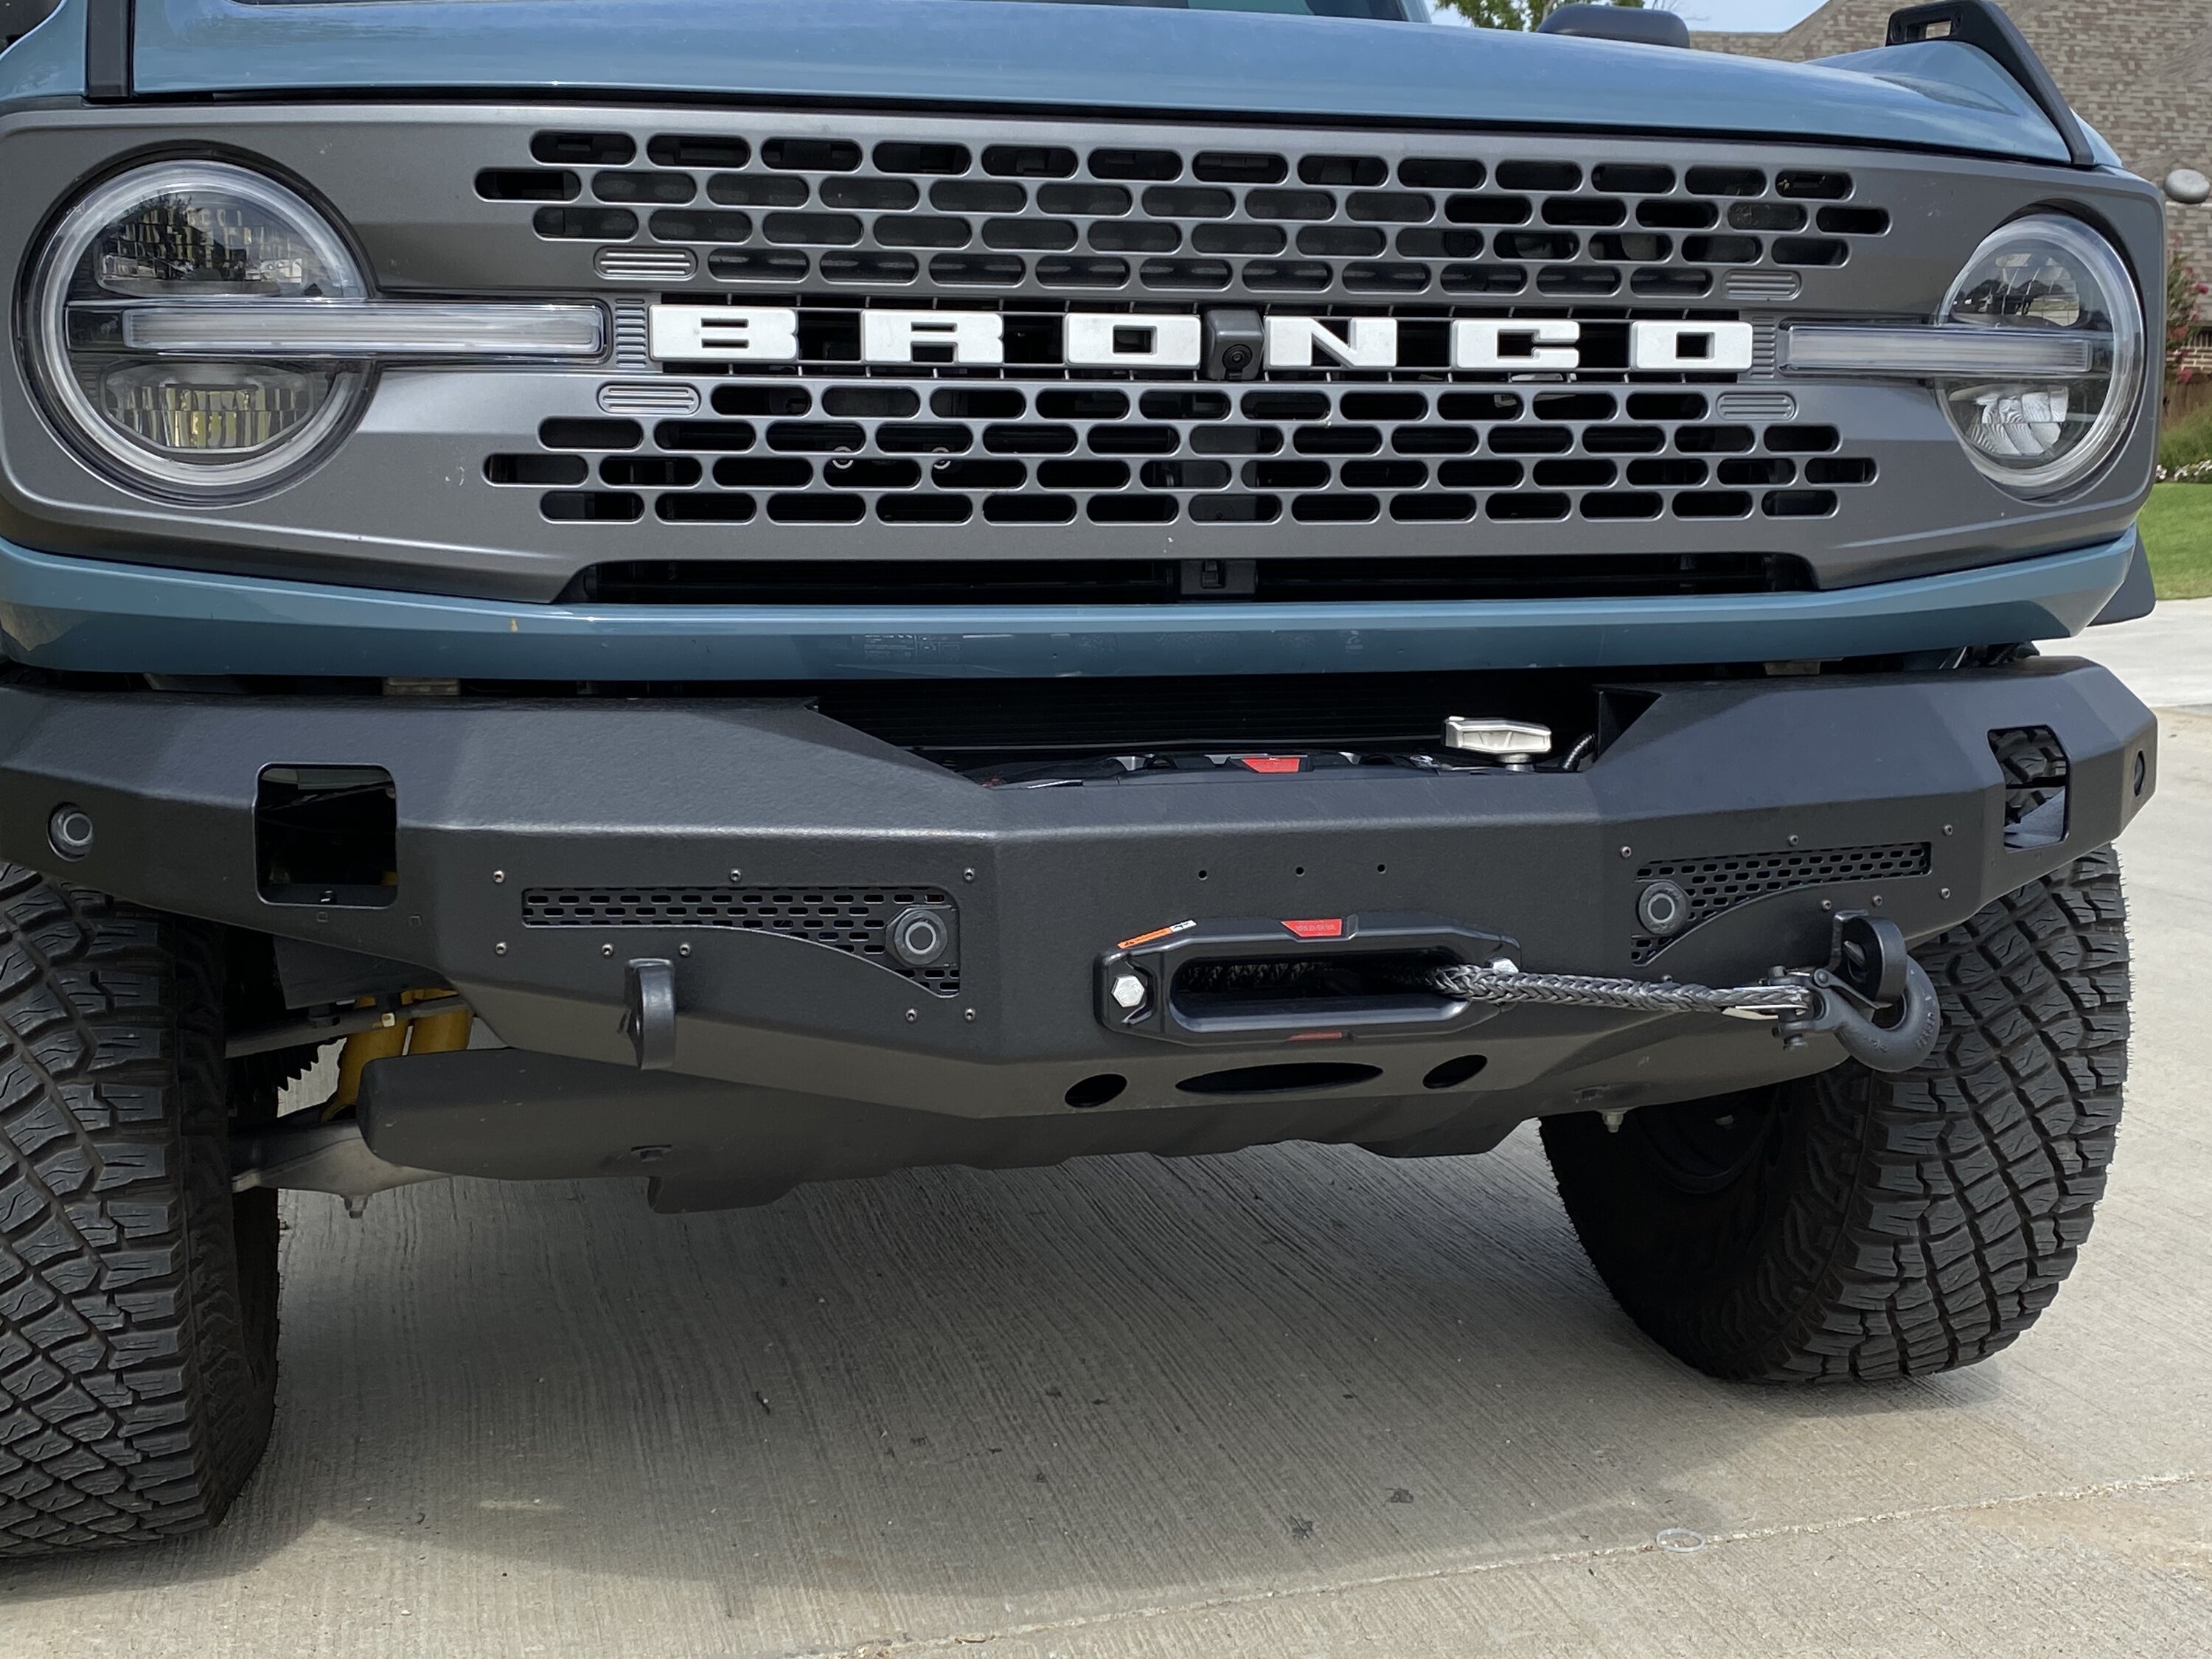 Ford Bronco BAMF Overland Front Bumper (Bay Area Metal Fab) Installed & Review IMG_3117